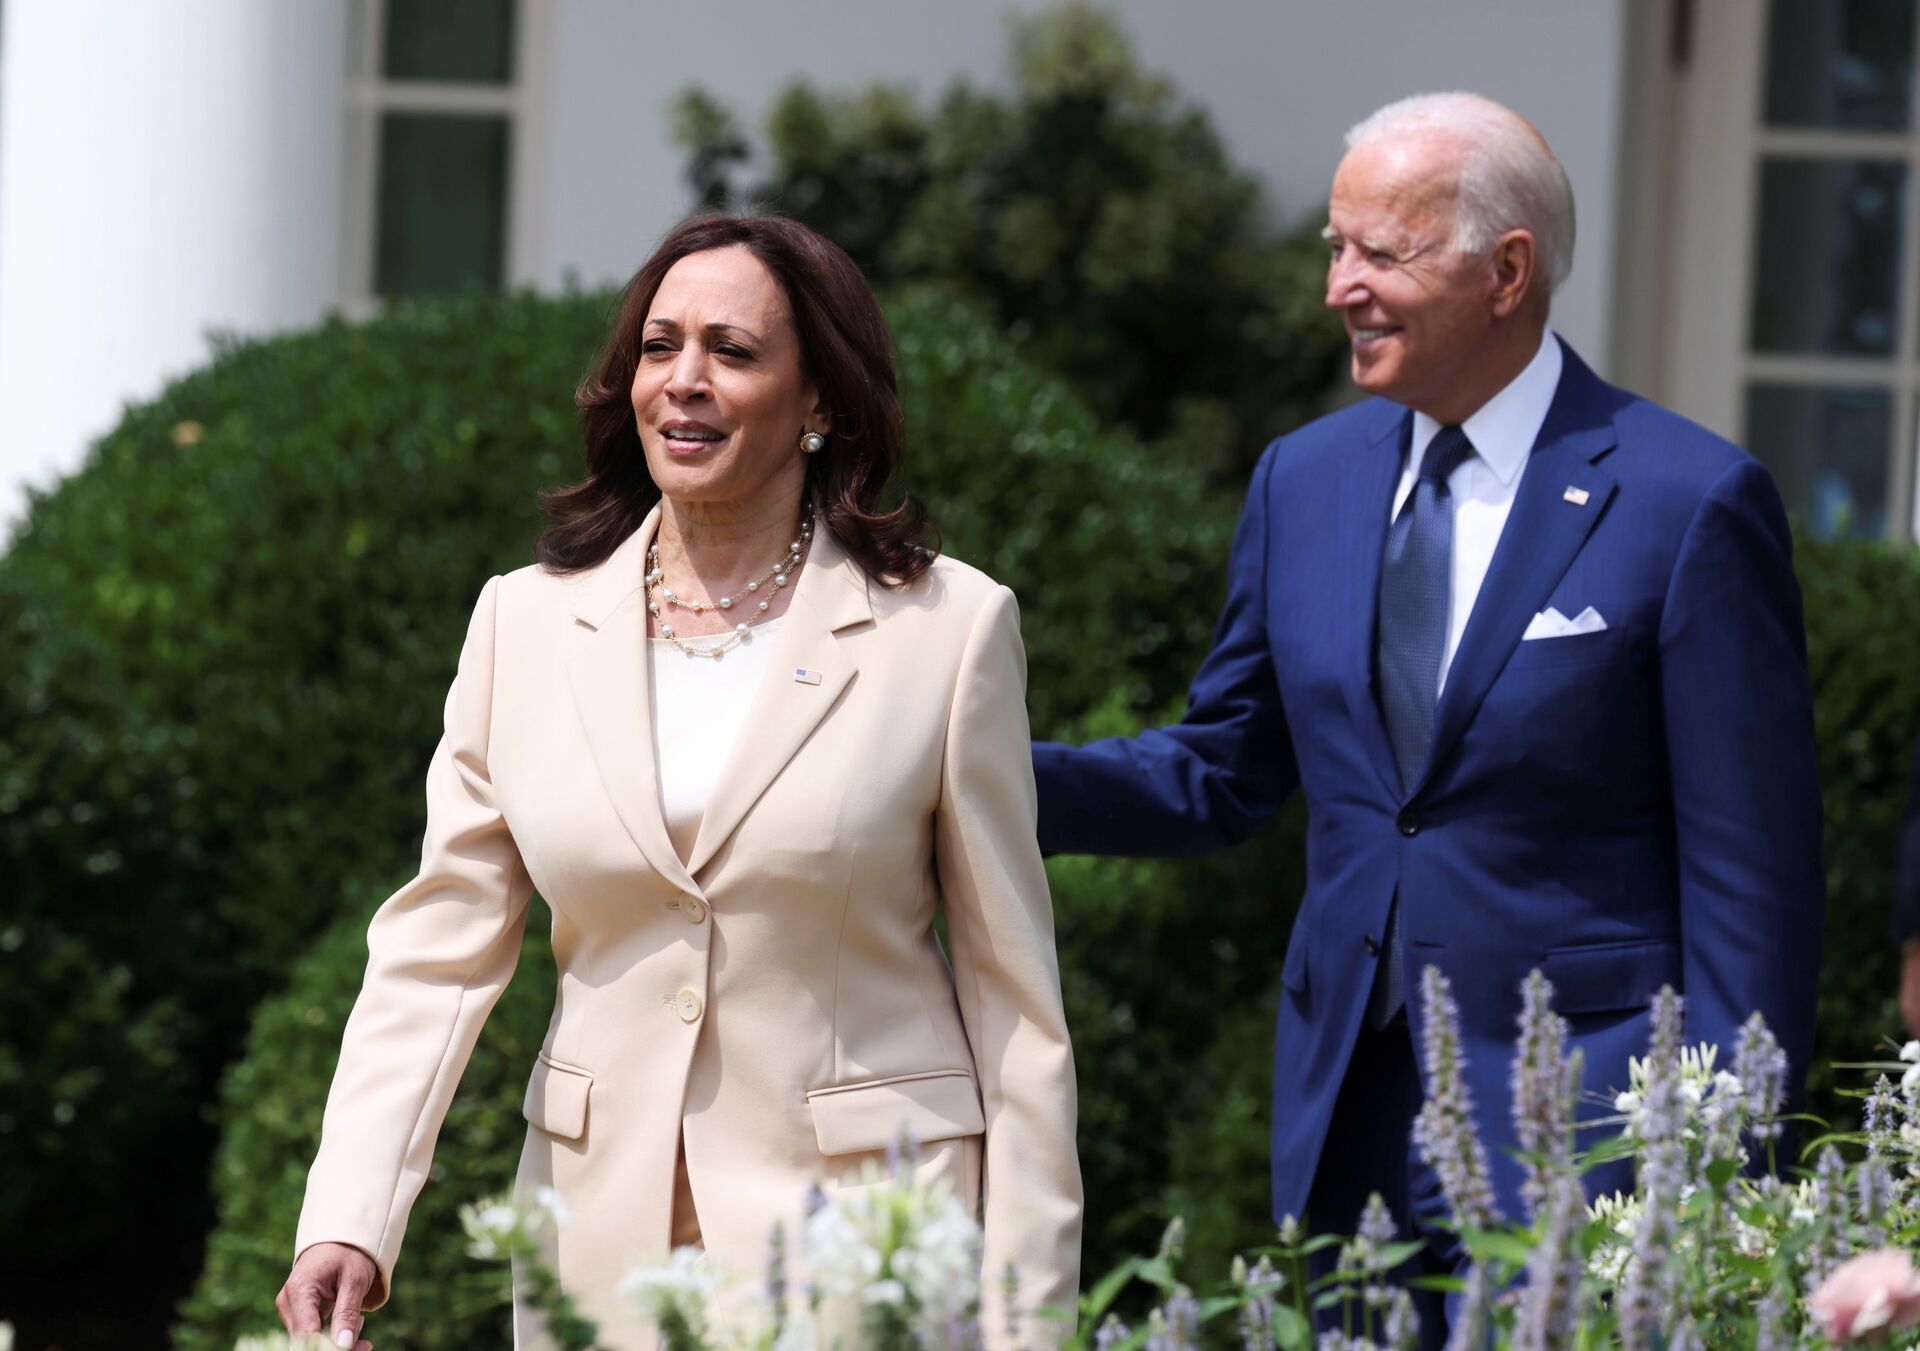 U.S. President Joe Biden and Vice President Kamala Harris arrive for an event to celebrate the 31st anniversary of the Americans with Disabilities Act (ADA) in the White House Rose Garden in Washington, U.S., July 26, 2021 - Sputnik International, 1920, 07.09.2021